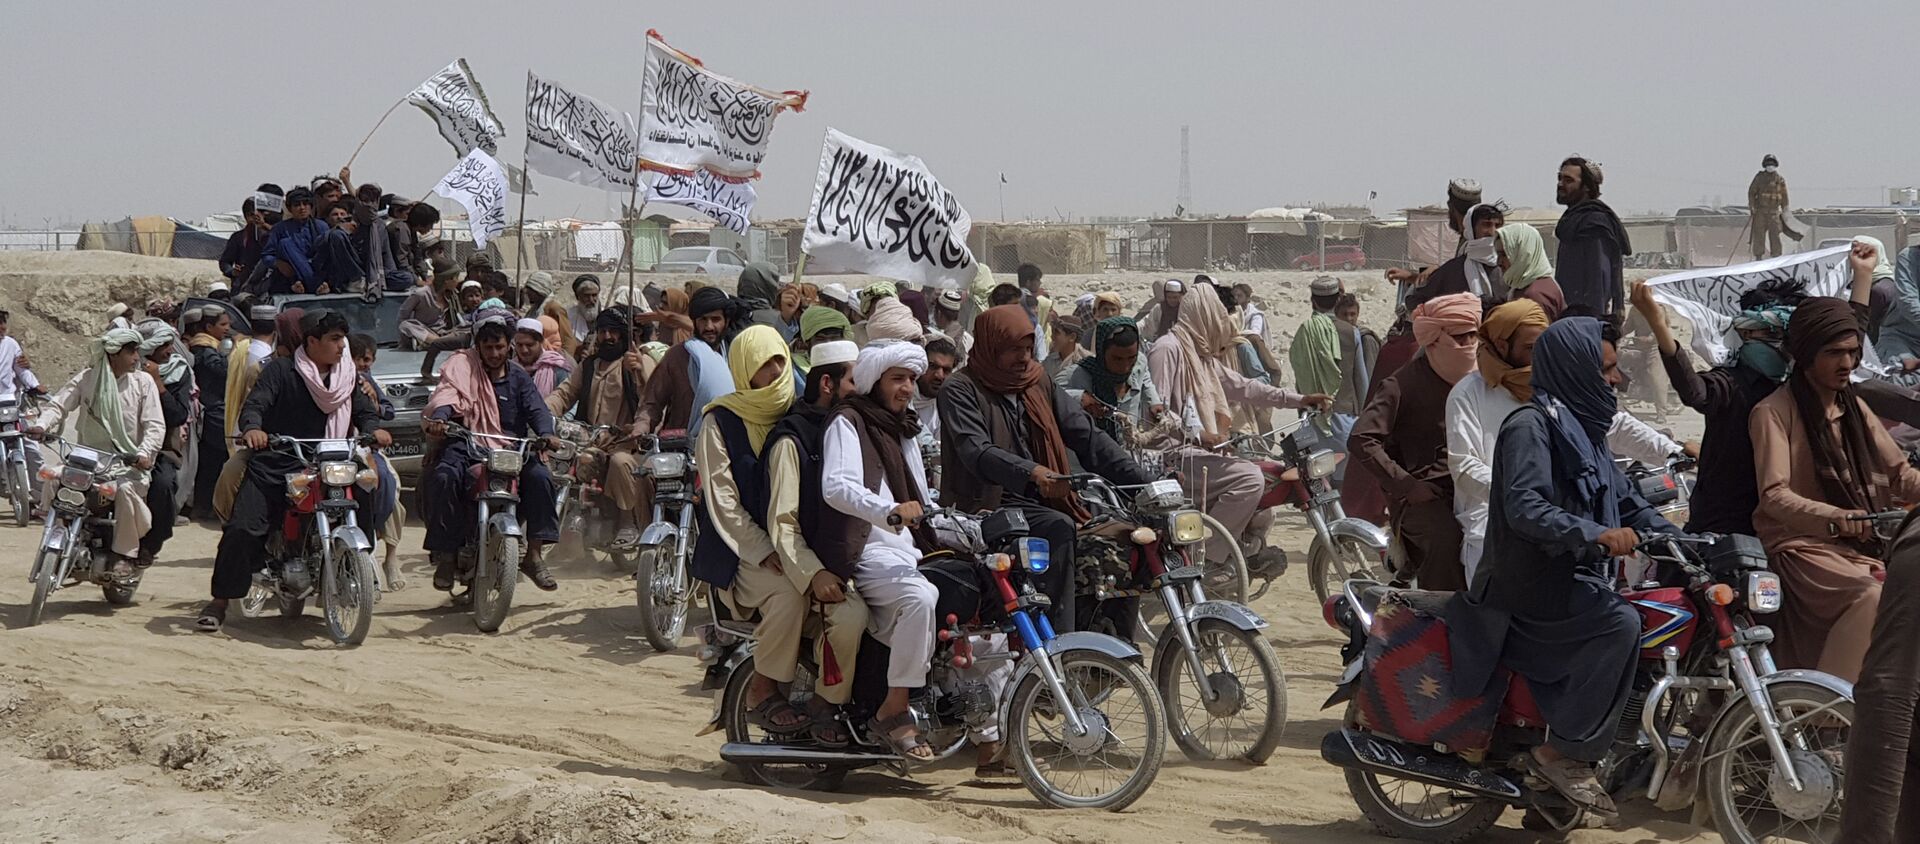 Supporters of the Taliban carry the Taliban's signature white flags in the Afghan-Pakistan border town of Chaman, Pakistan, Wednesday, July 14, 2021 - Sputnik International, 1920, 01.08.2021